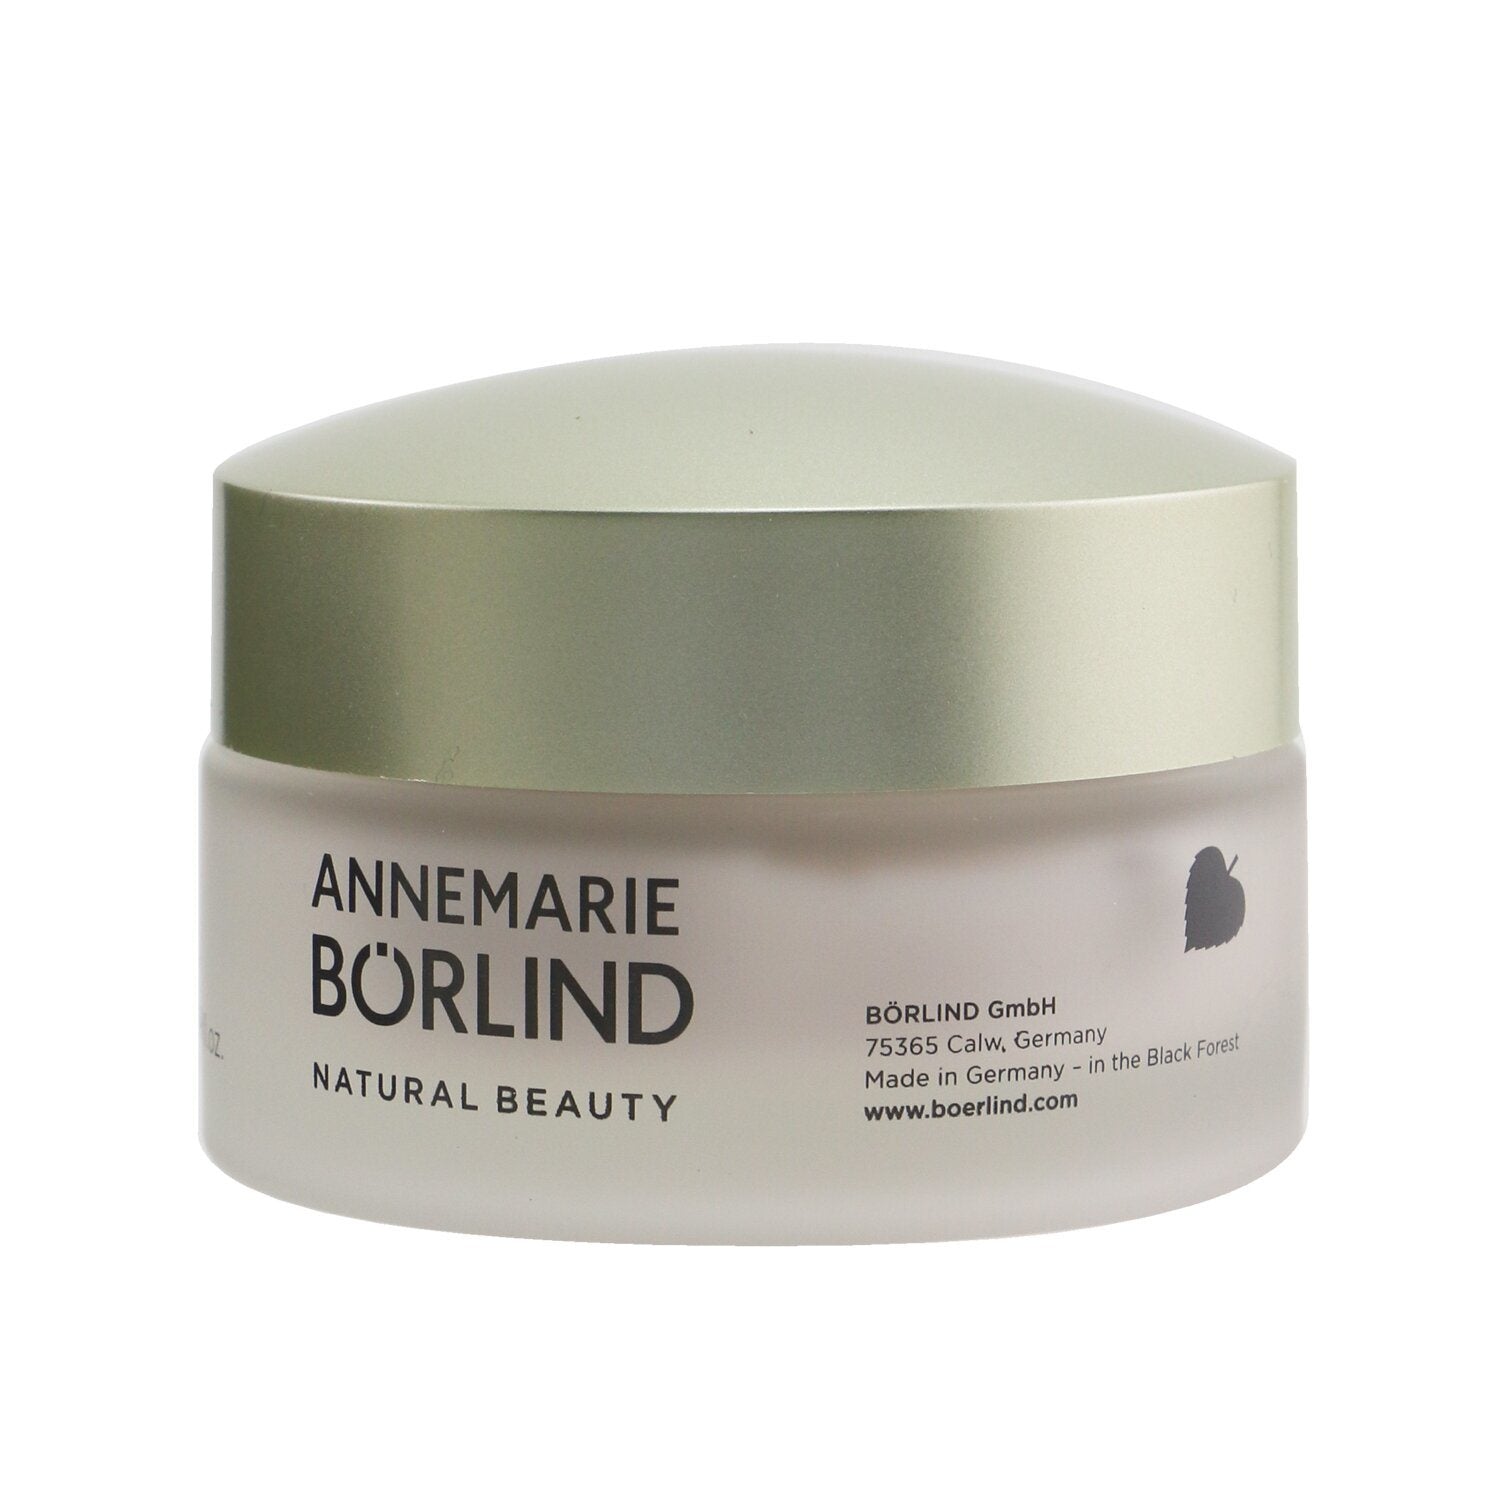 ANNEMARIE BORLIND - System Absolute System Anti-Aging Regenerating Night Cream - For Mature Skin 3P's Inclusive Beauty